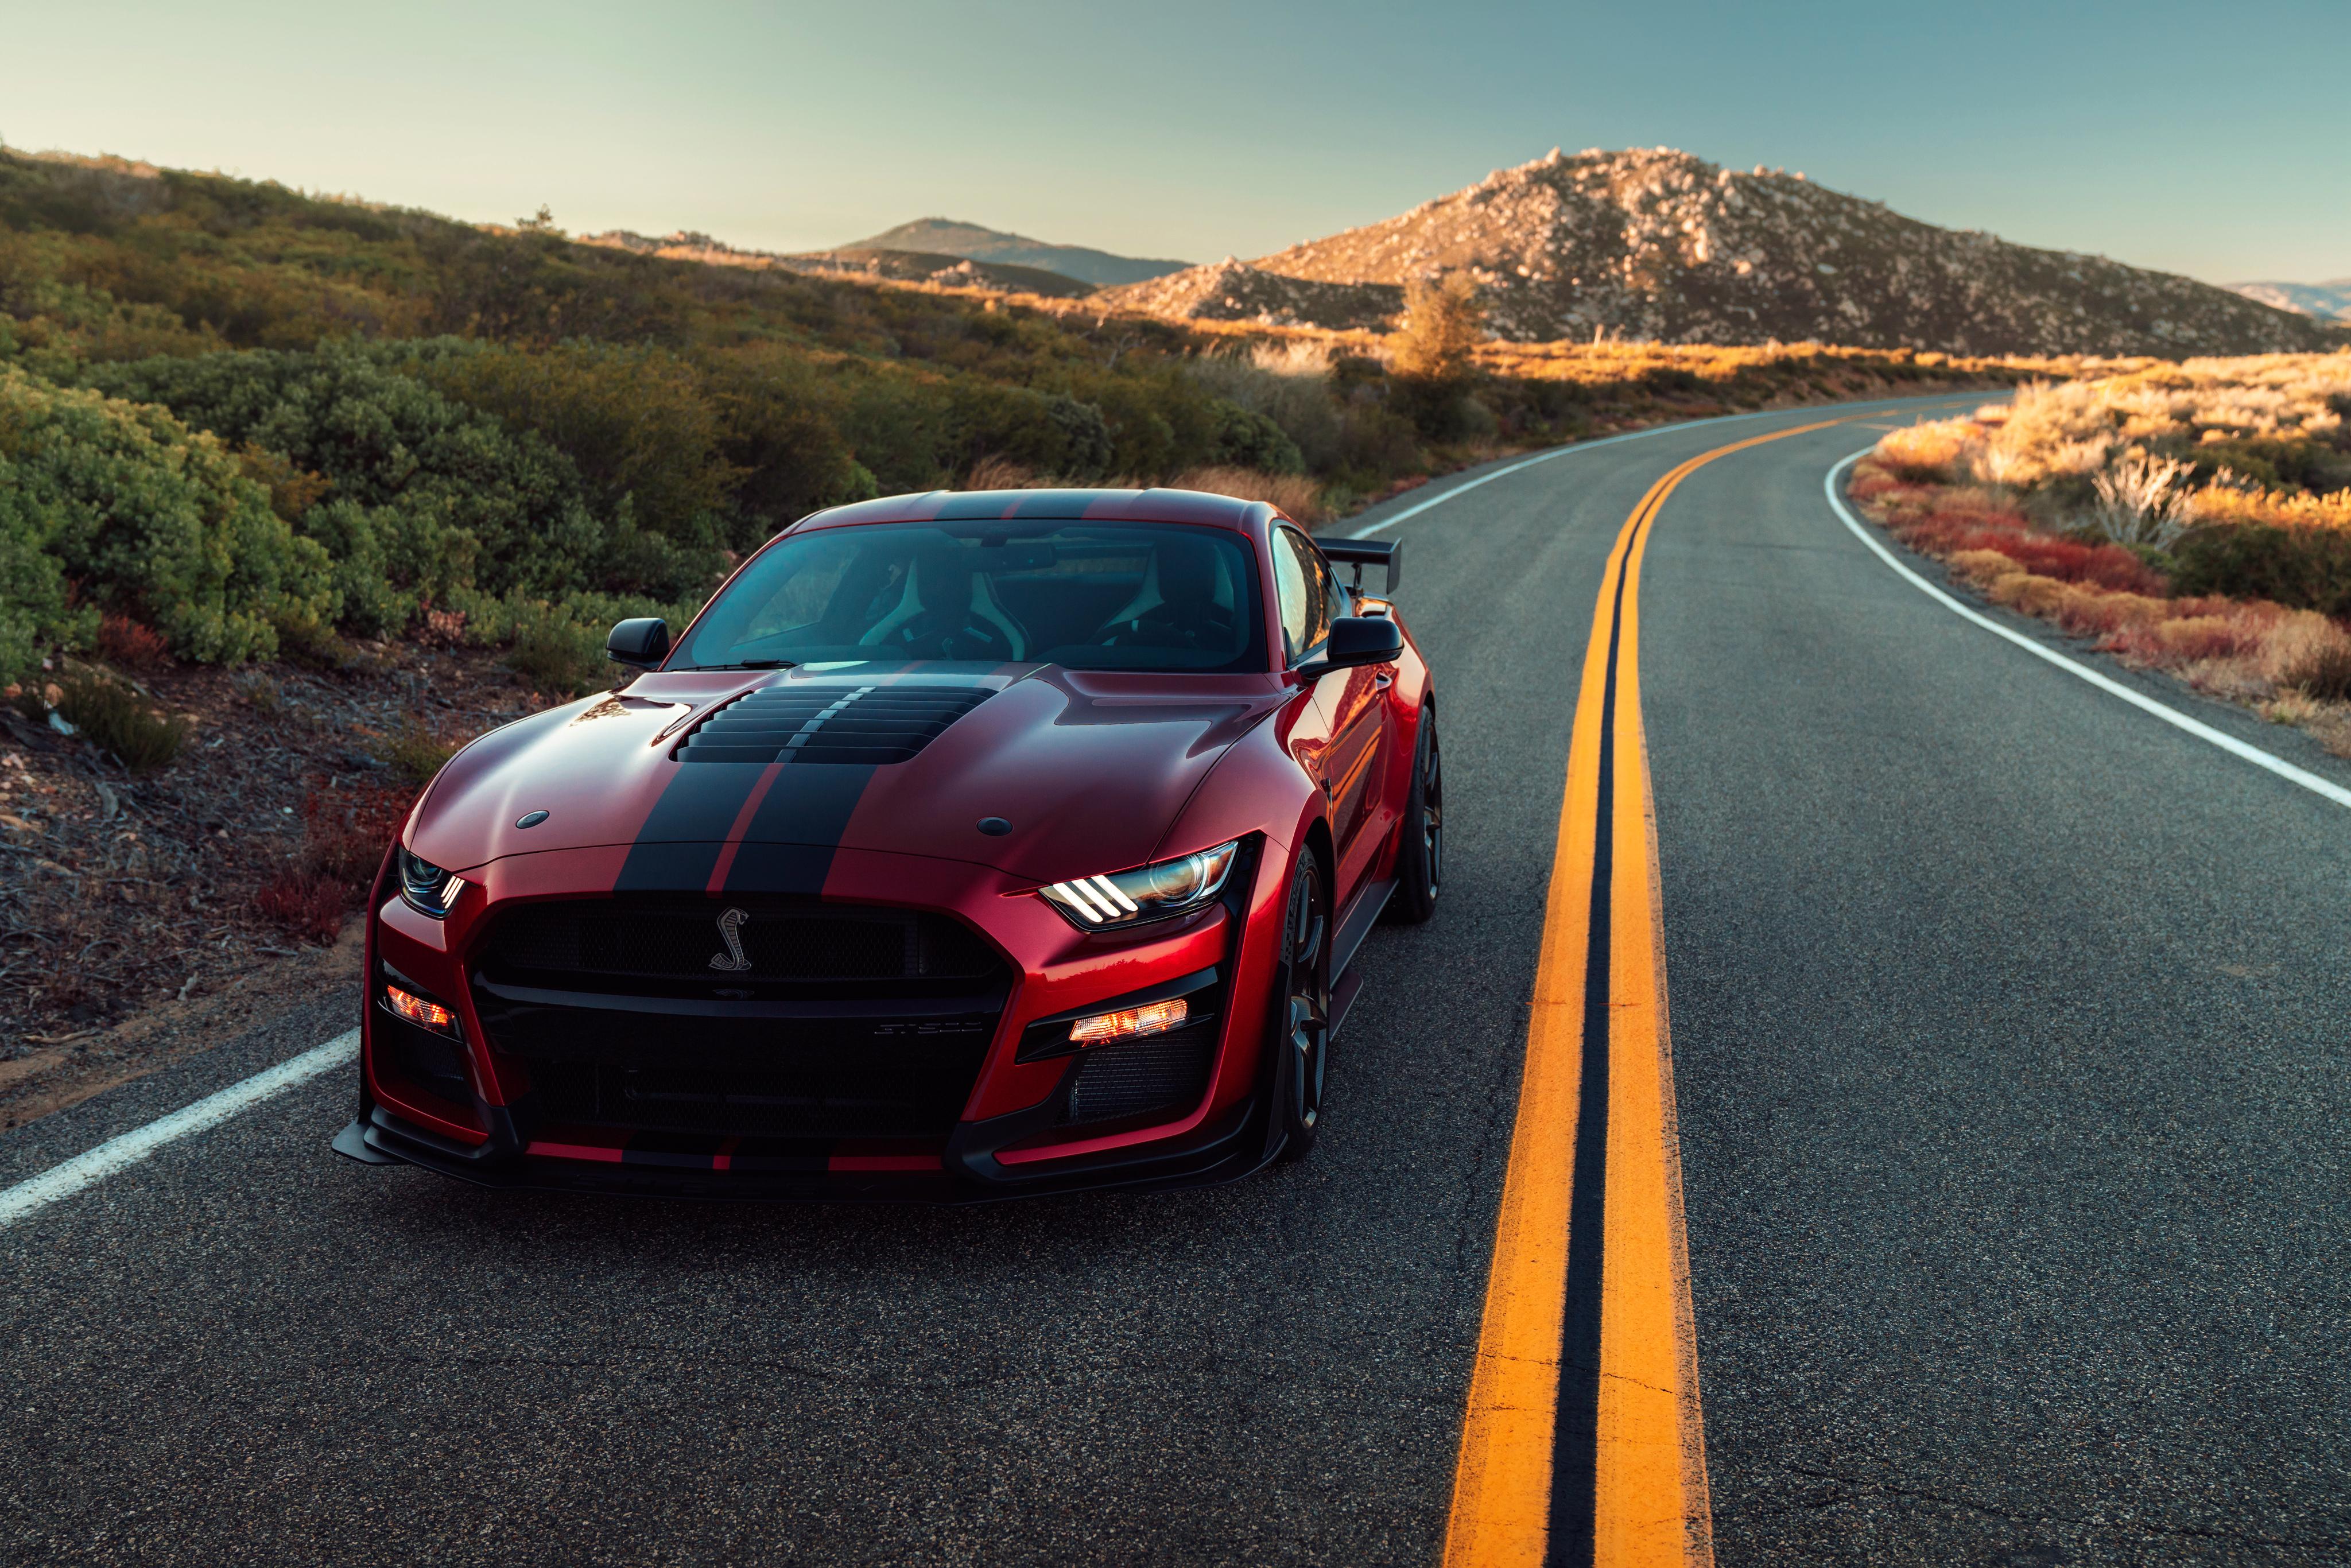 2020 Ford Mustang Shelby GT500 4k, HD Cars, 4k Wallpapers